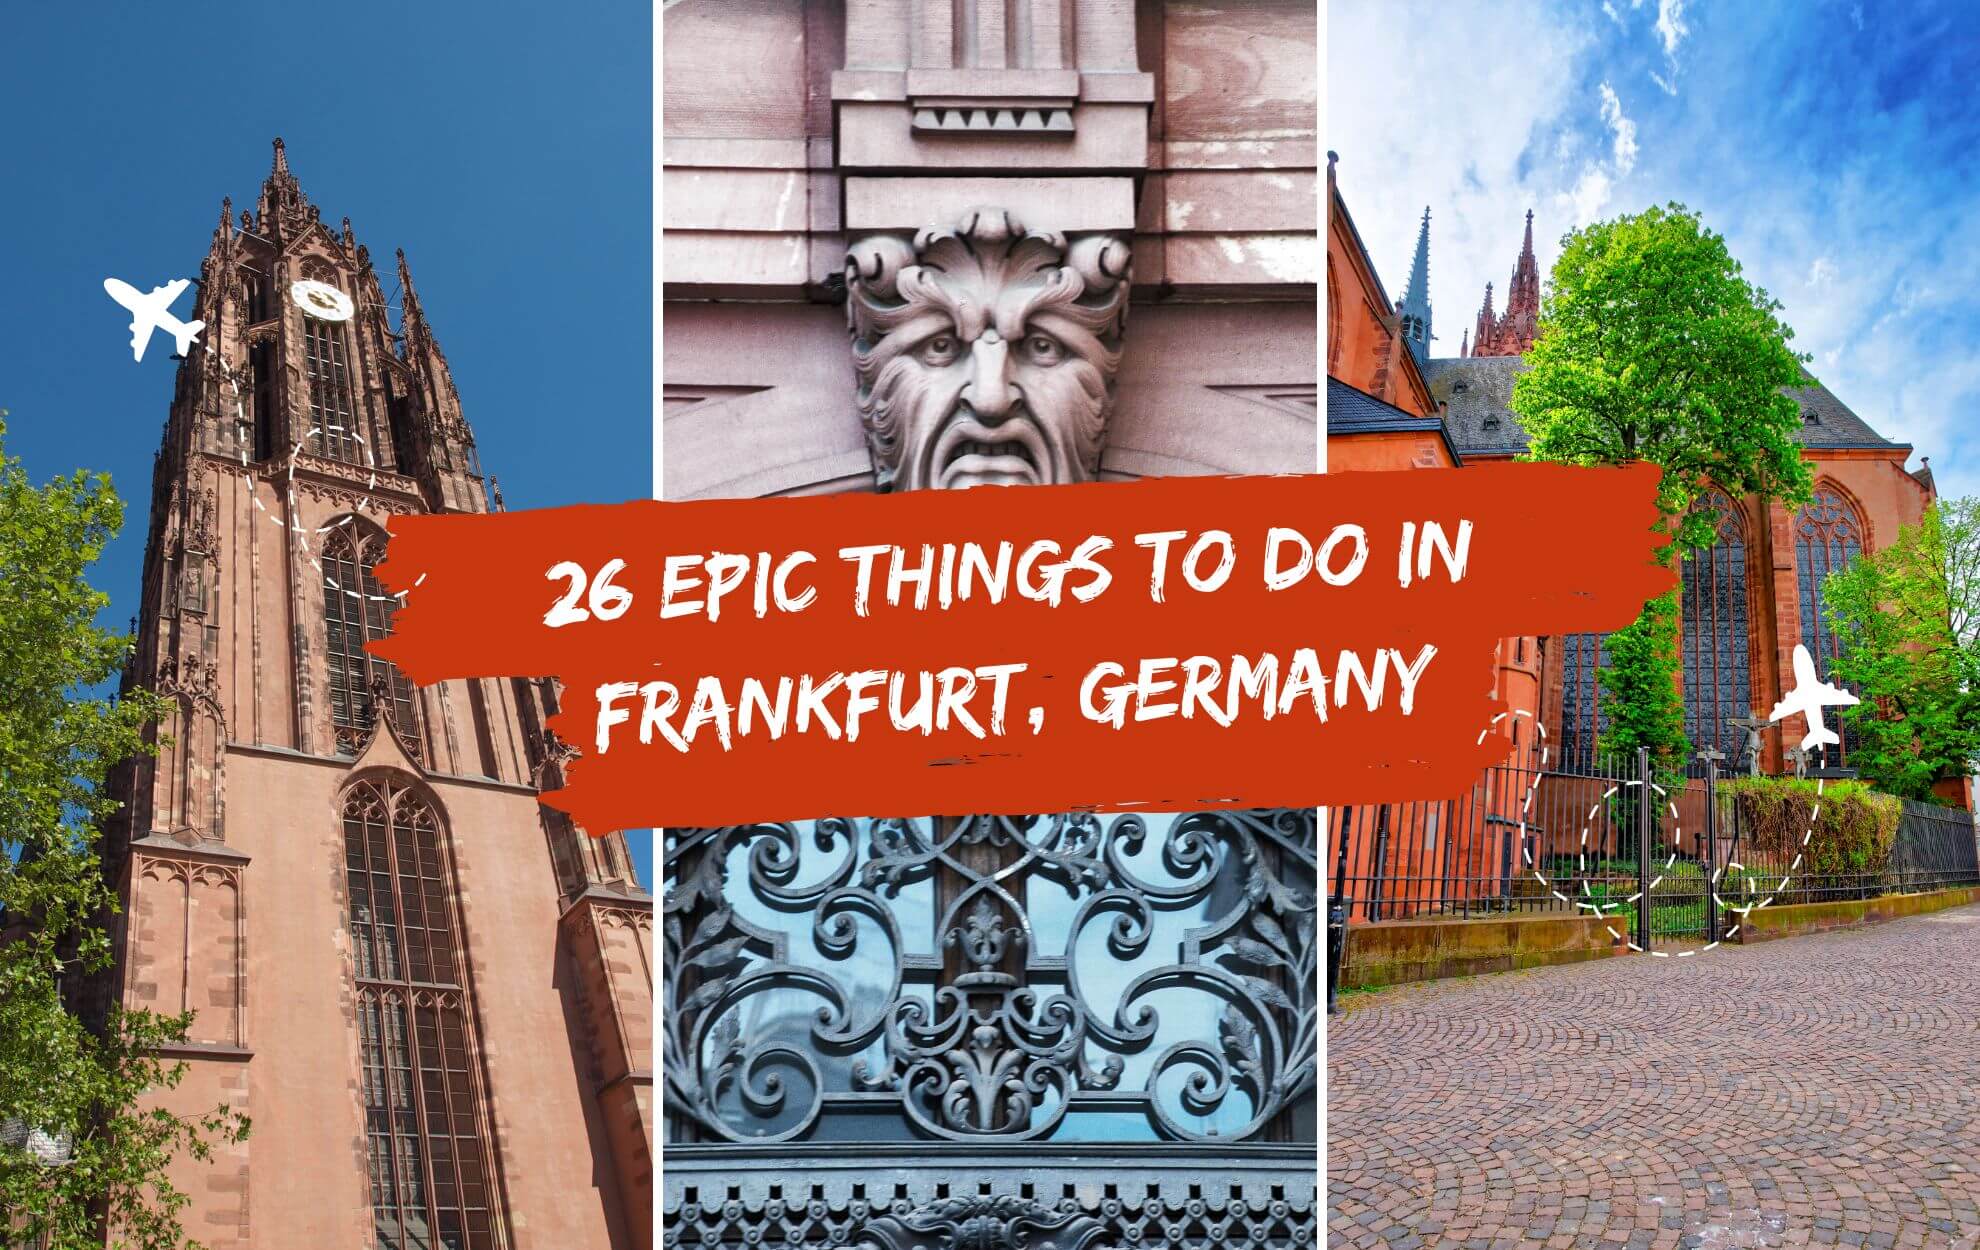 26 Epic Things to Do in Frankfurt, Germany